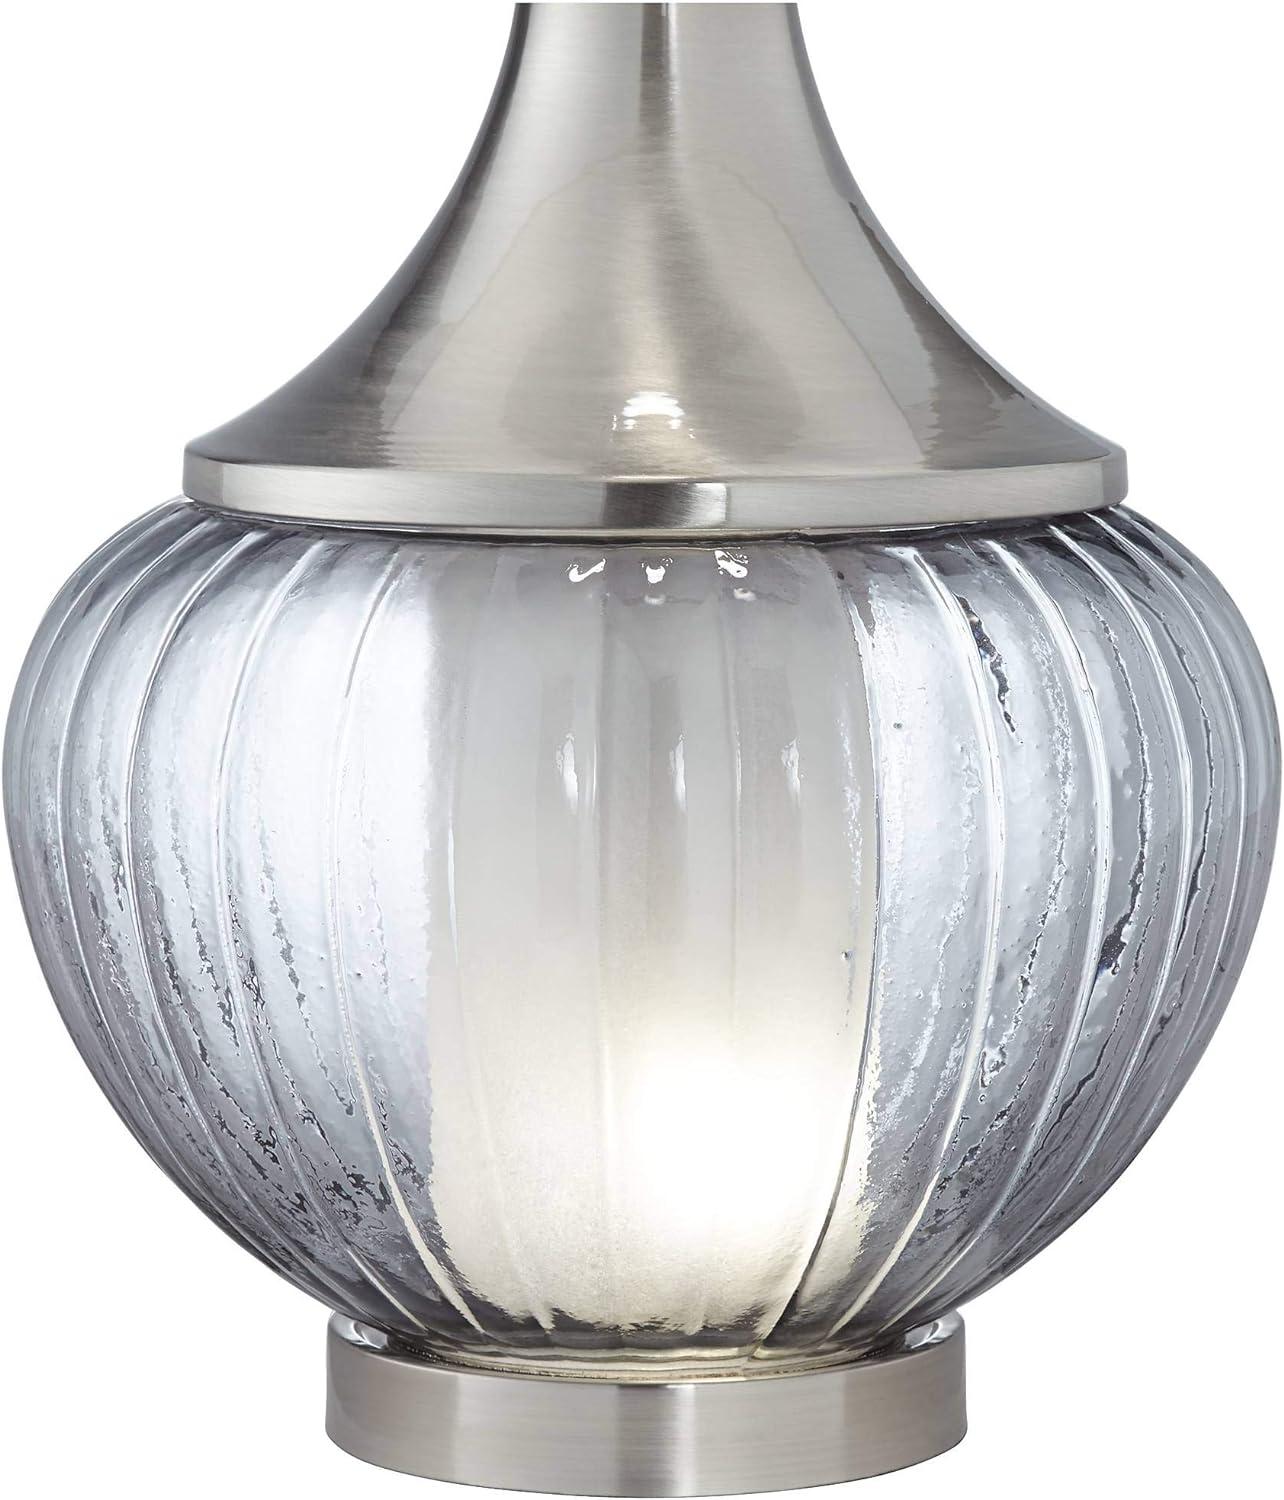 Courtney 23.5" Fluted Smoked Glass Table Lamp with White Linen Shade